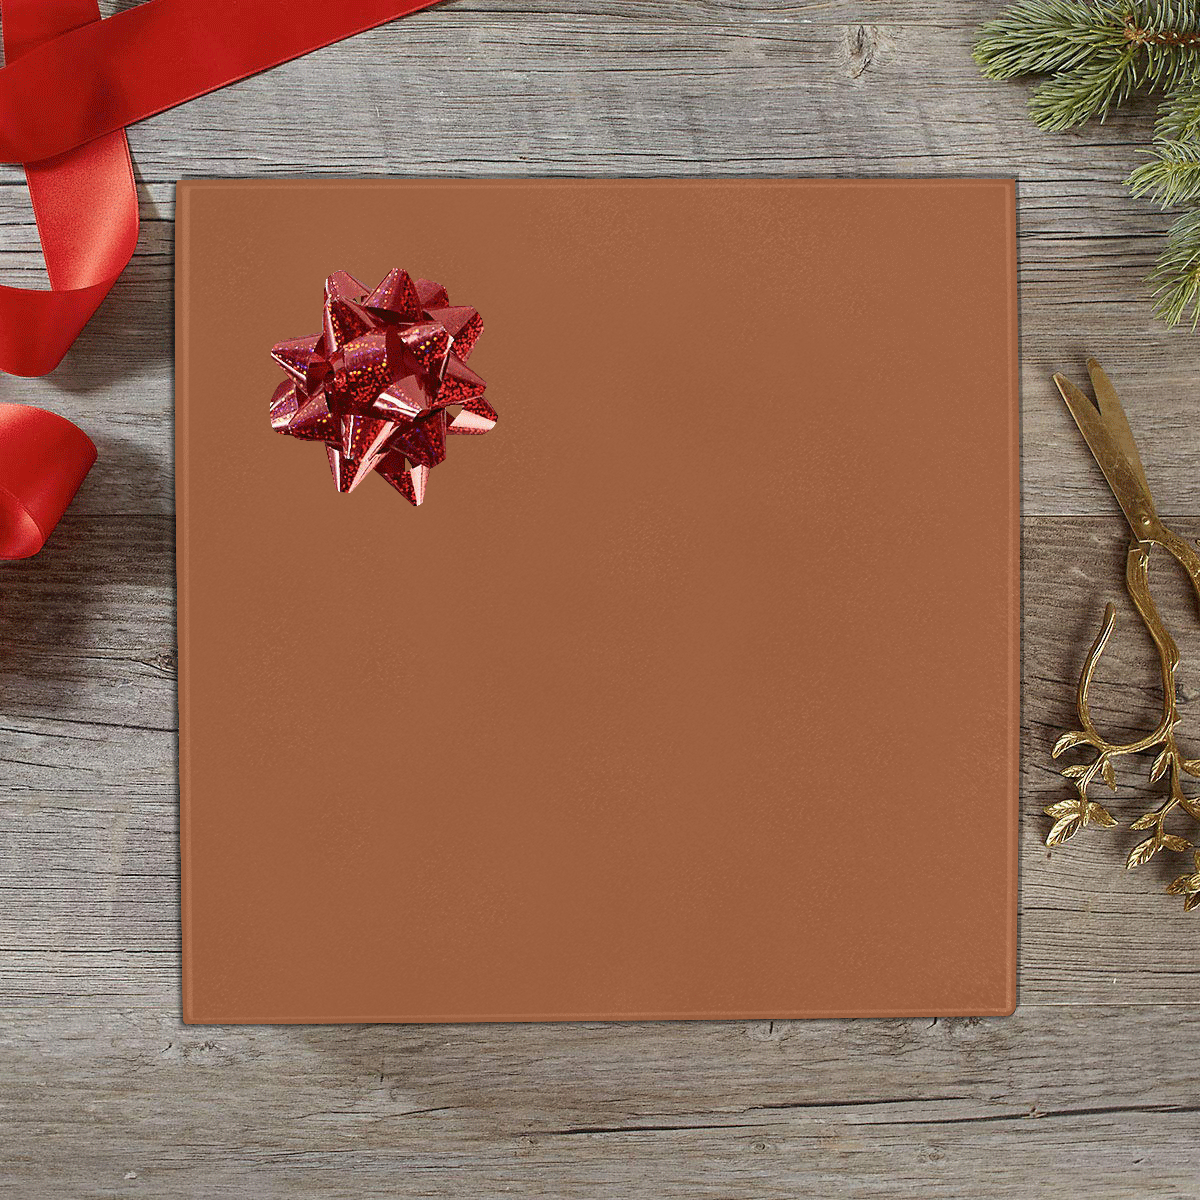 color sienna Gift Wrapping Paper 58"x 23" (1 Roll)